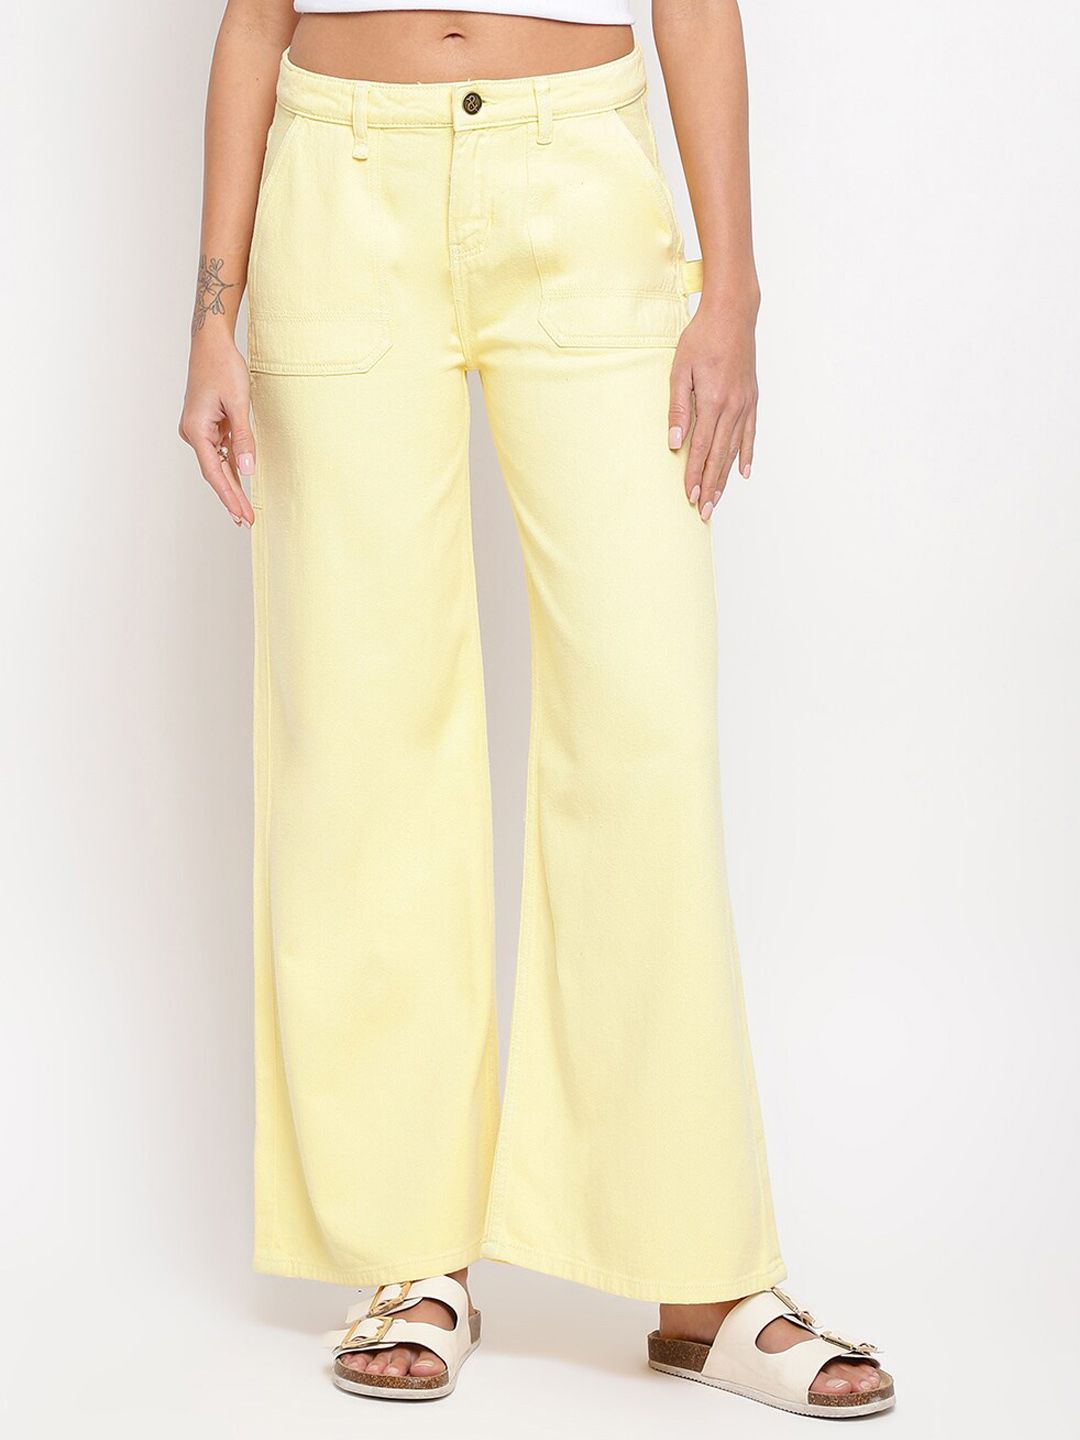 TALES & STORIES Women Yellow Wide Leg Stretchable Jeans Price in India